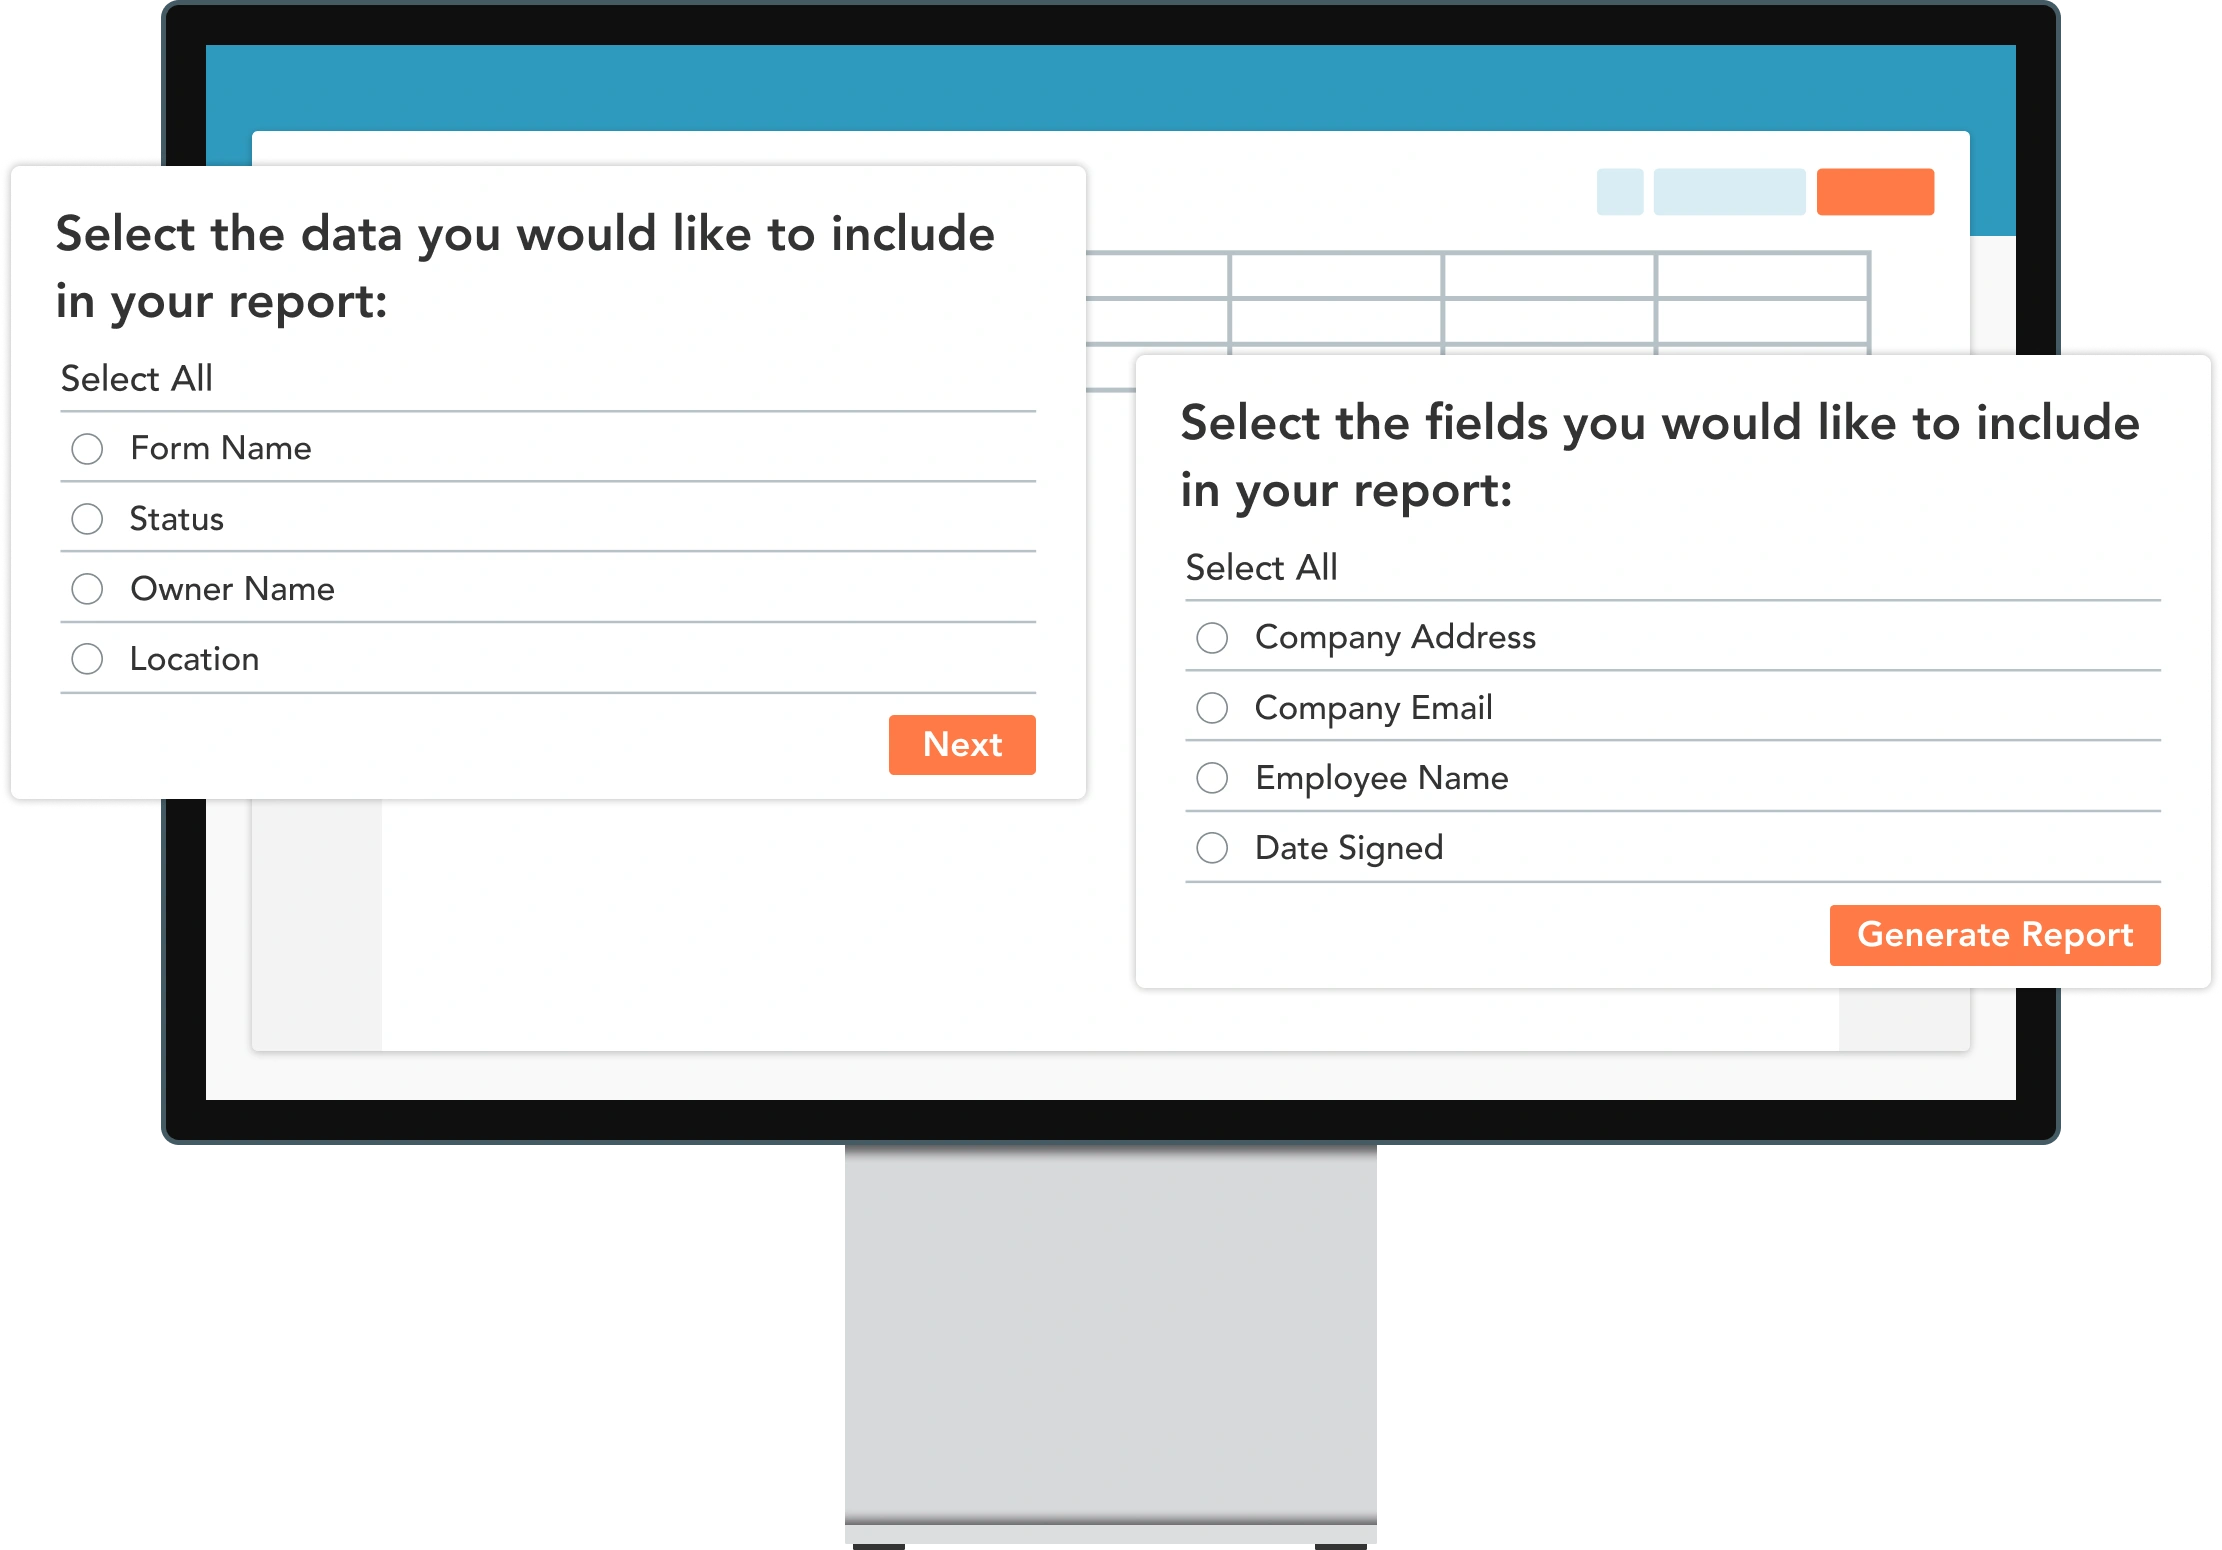 Custom reports with your most relevant form data.